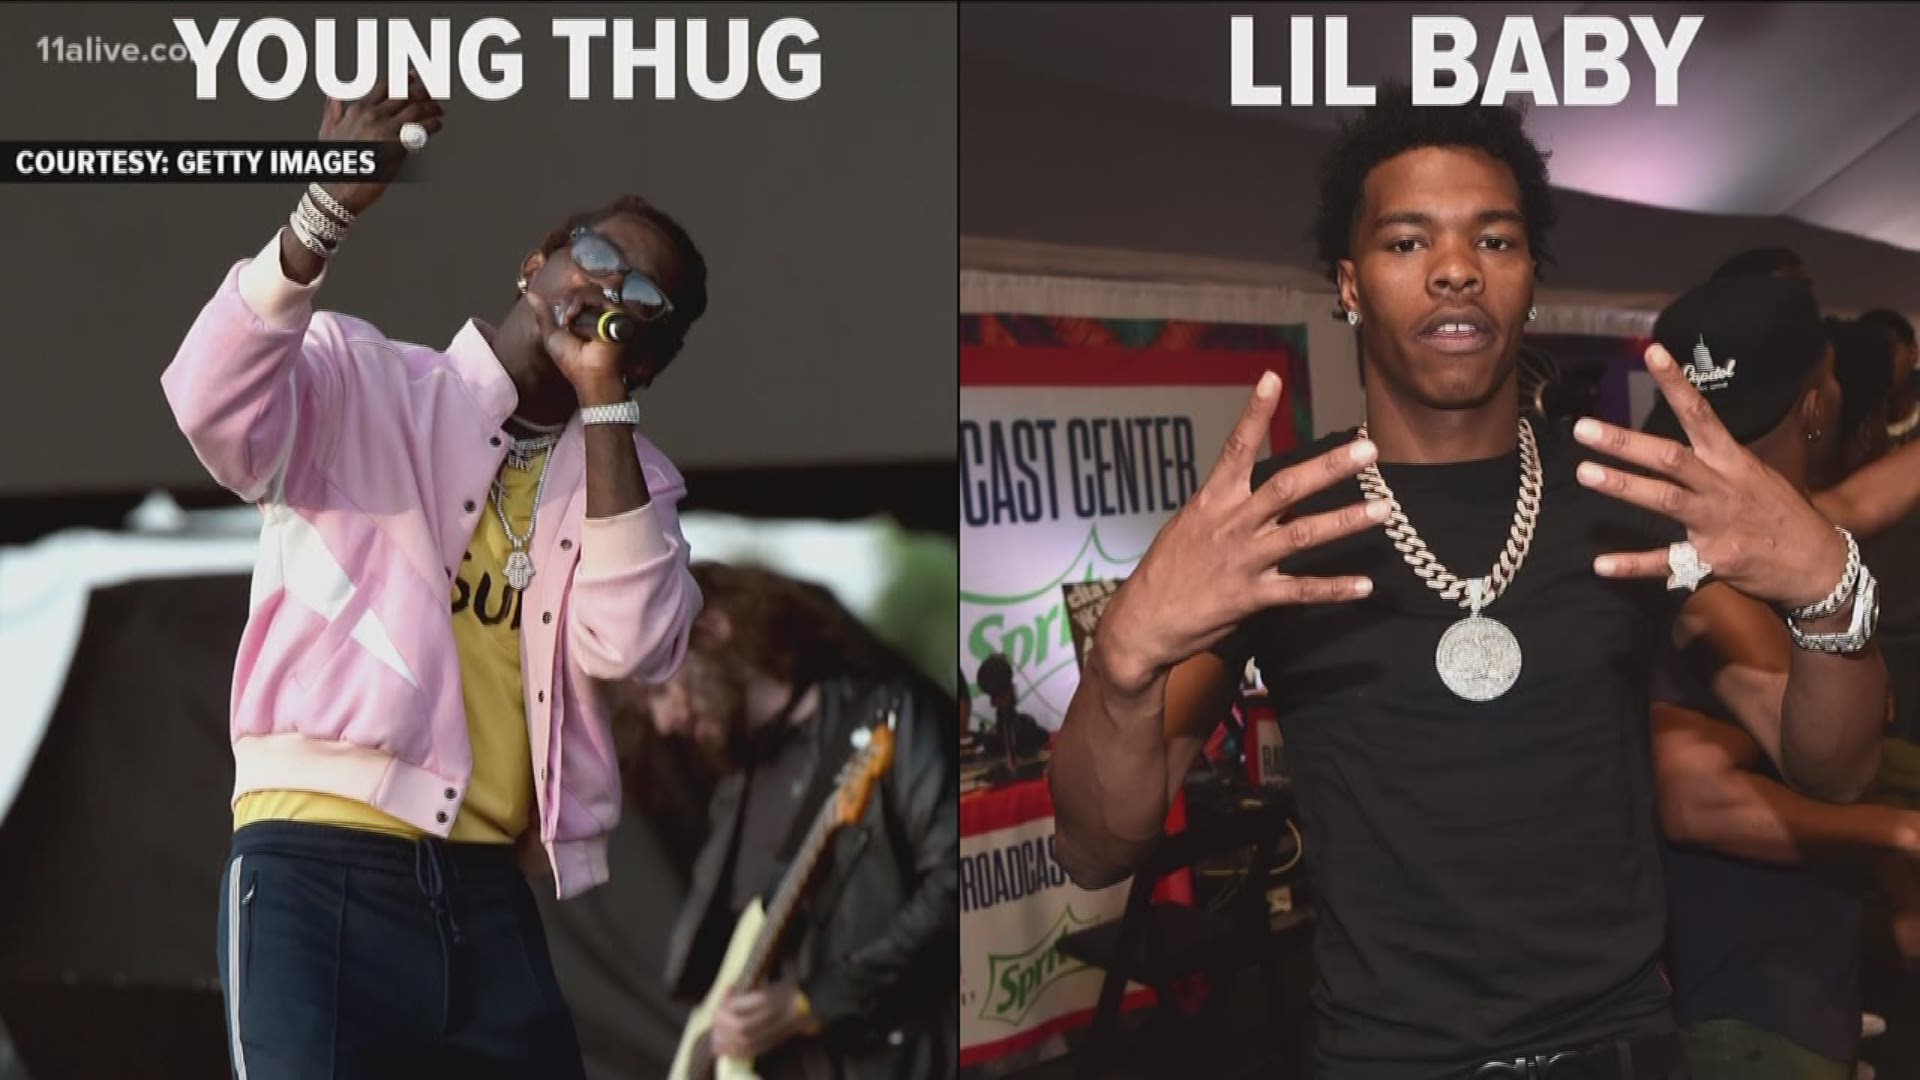 Jeweler Robbed Of 150 000 Worth Of Jewelry During Young Thug Lil Baby S Video Shoot Apd Says 11alive Com